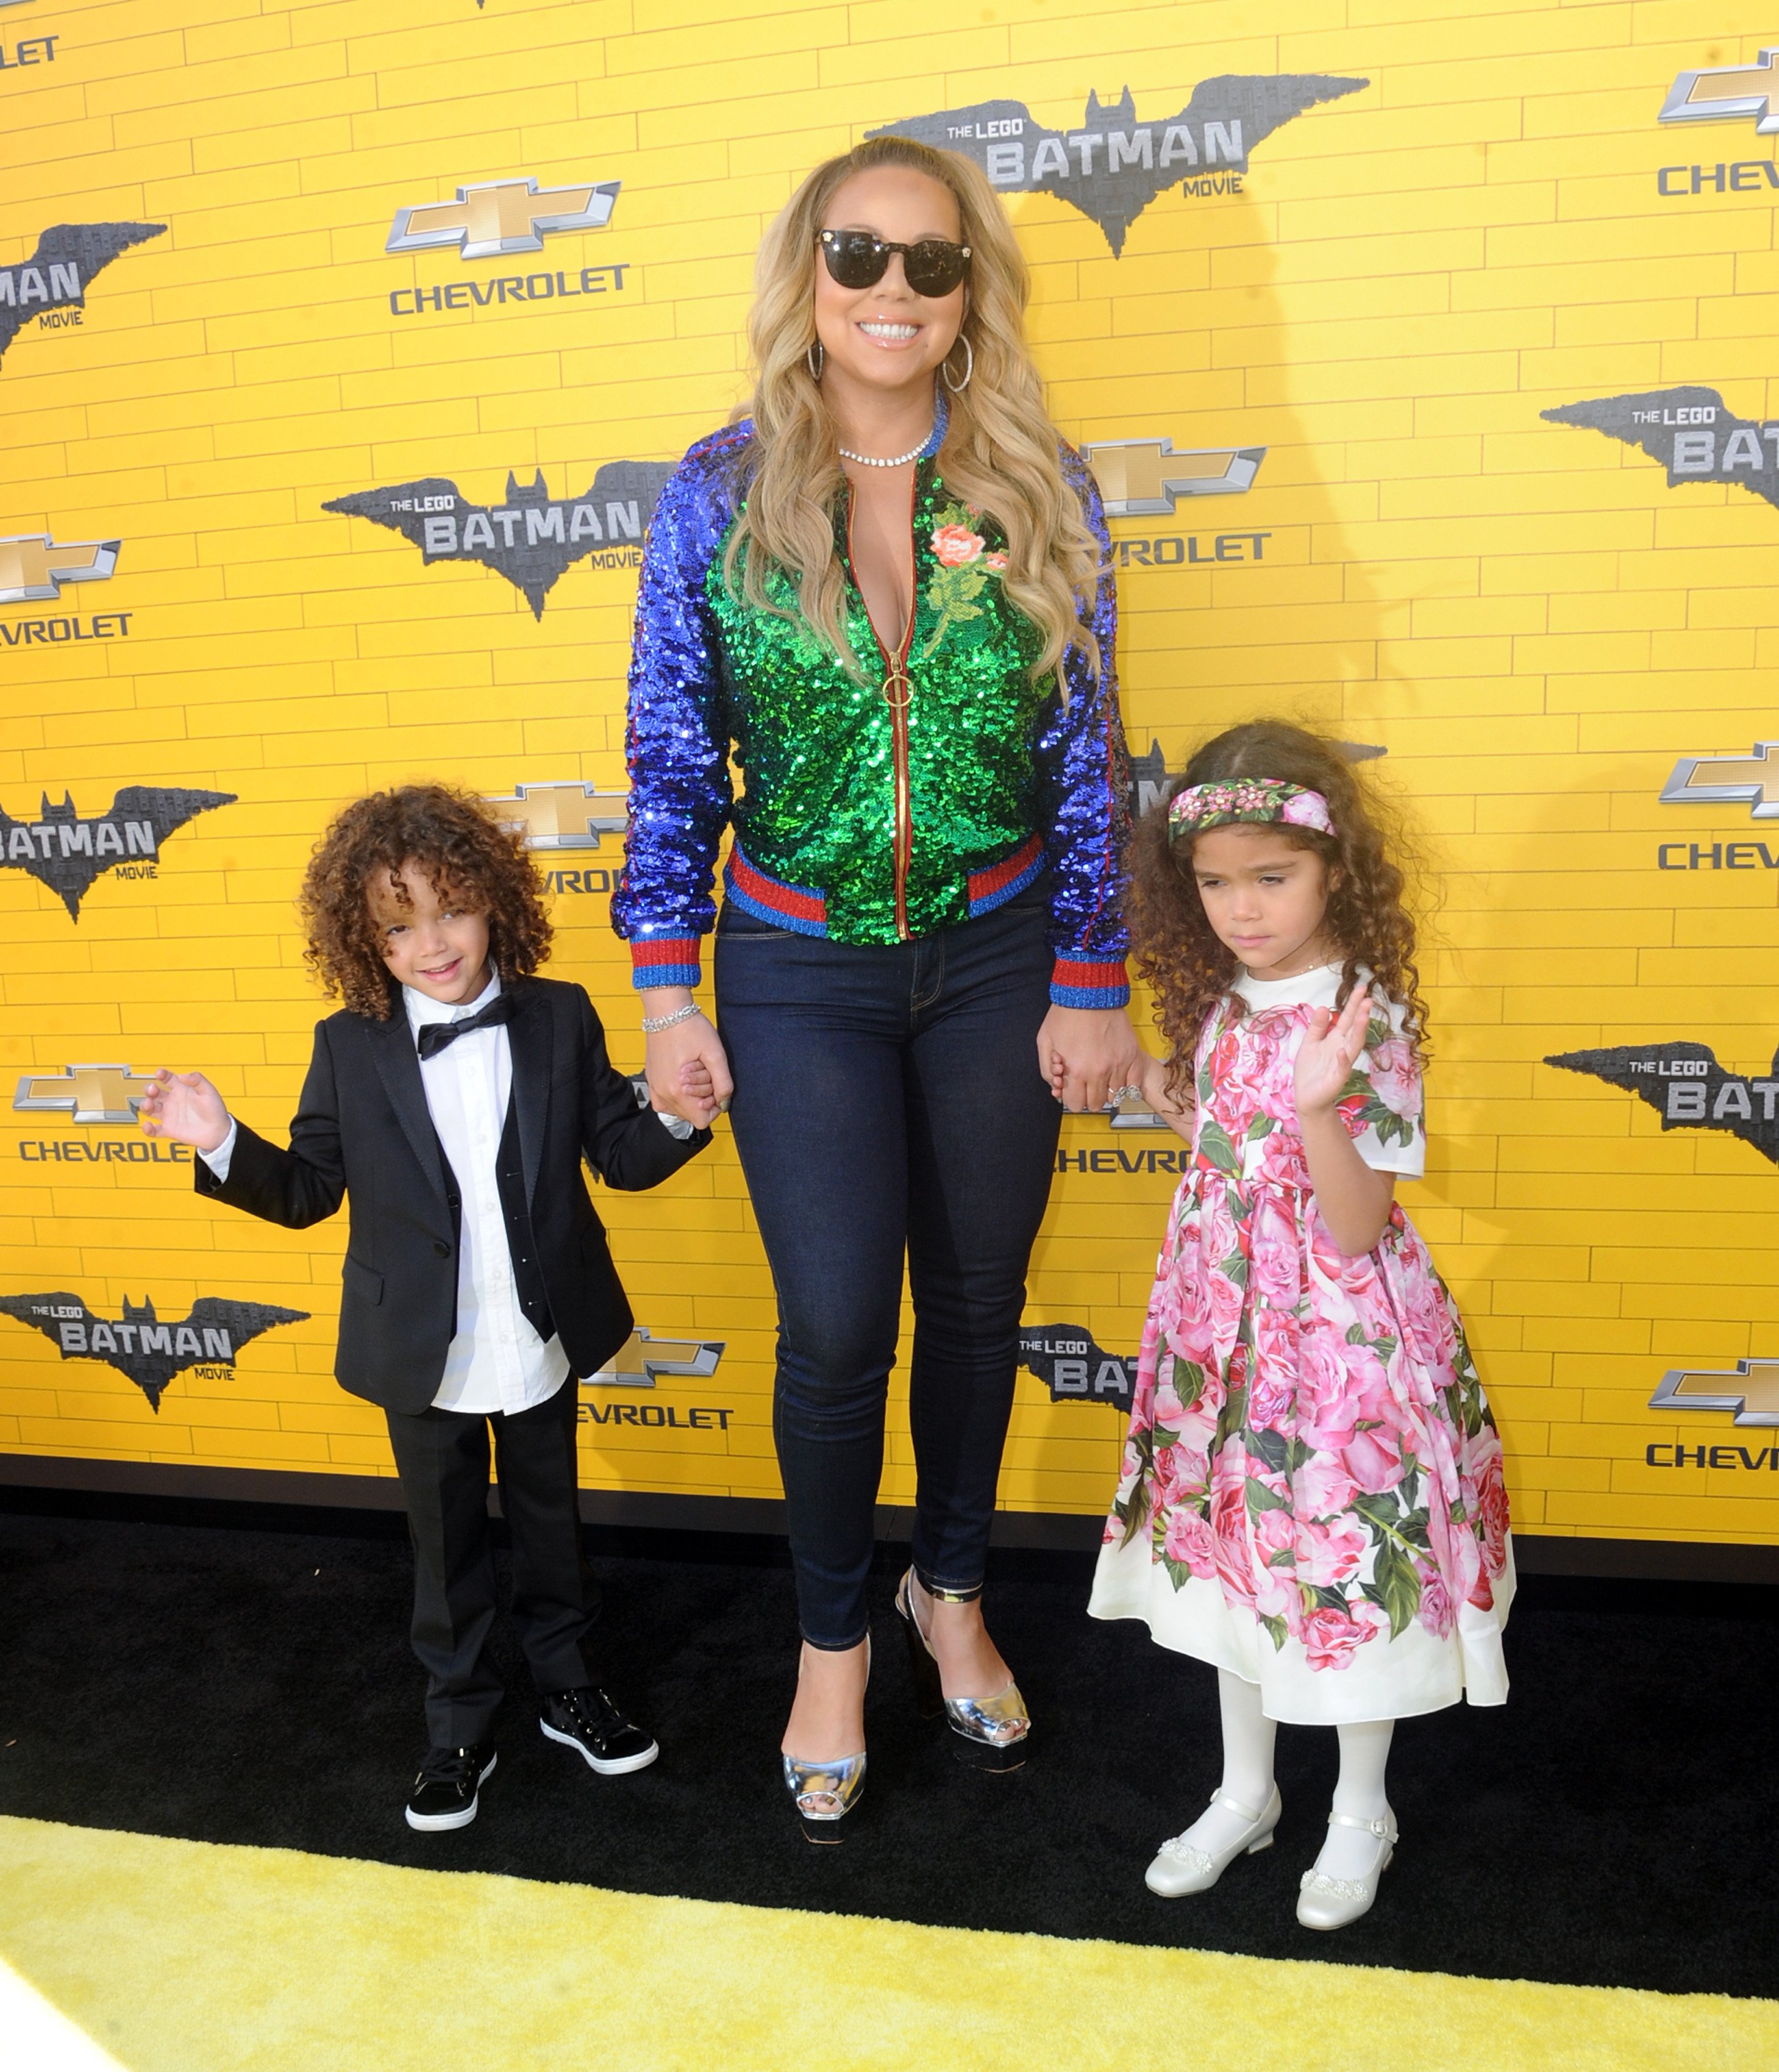 Mariah Carey and her two children at the premiere of Warner Bros Pictures' "The Lego Batman Movie" | Photo: Getty Images